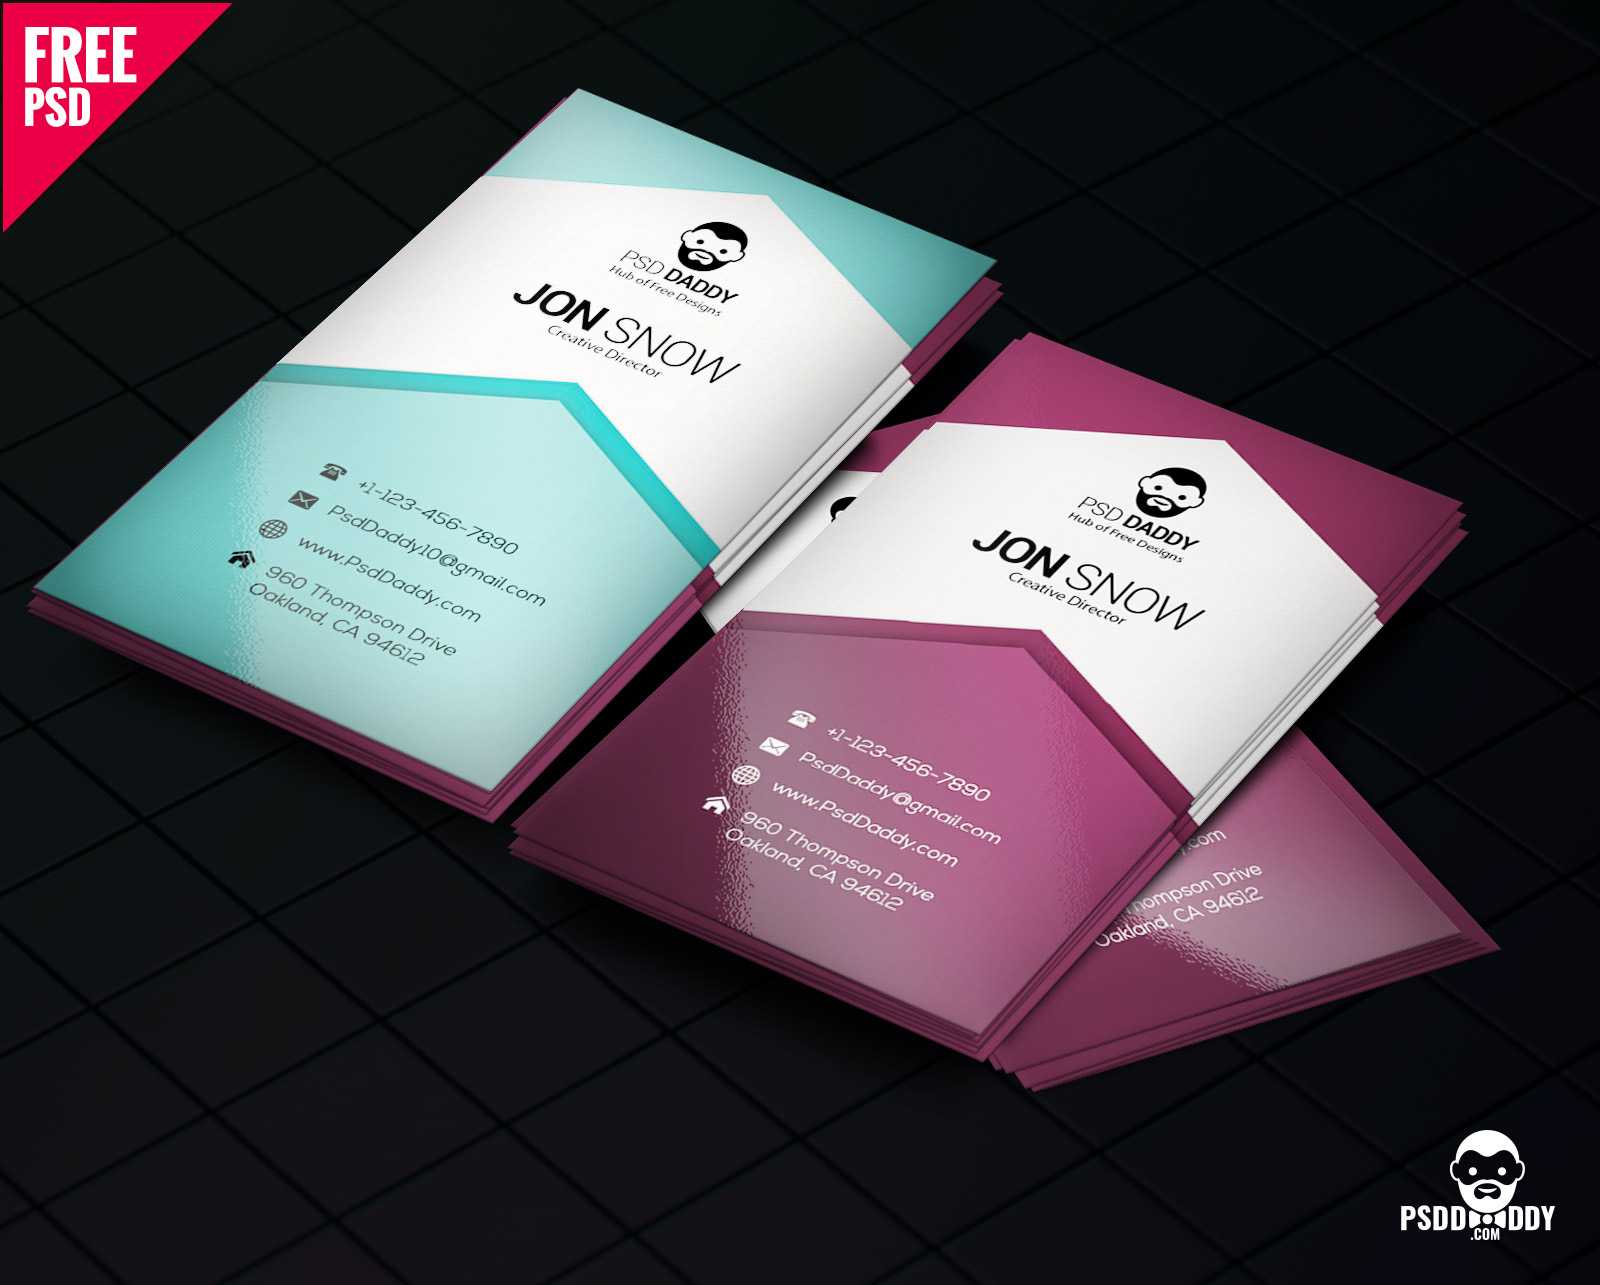 Download]Creative Business Card Psd Free | Psddaddy In Business Card Maker Template